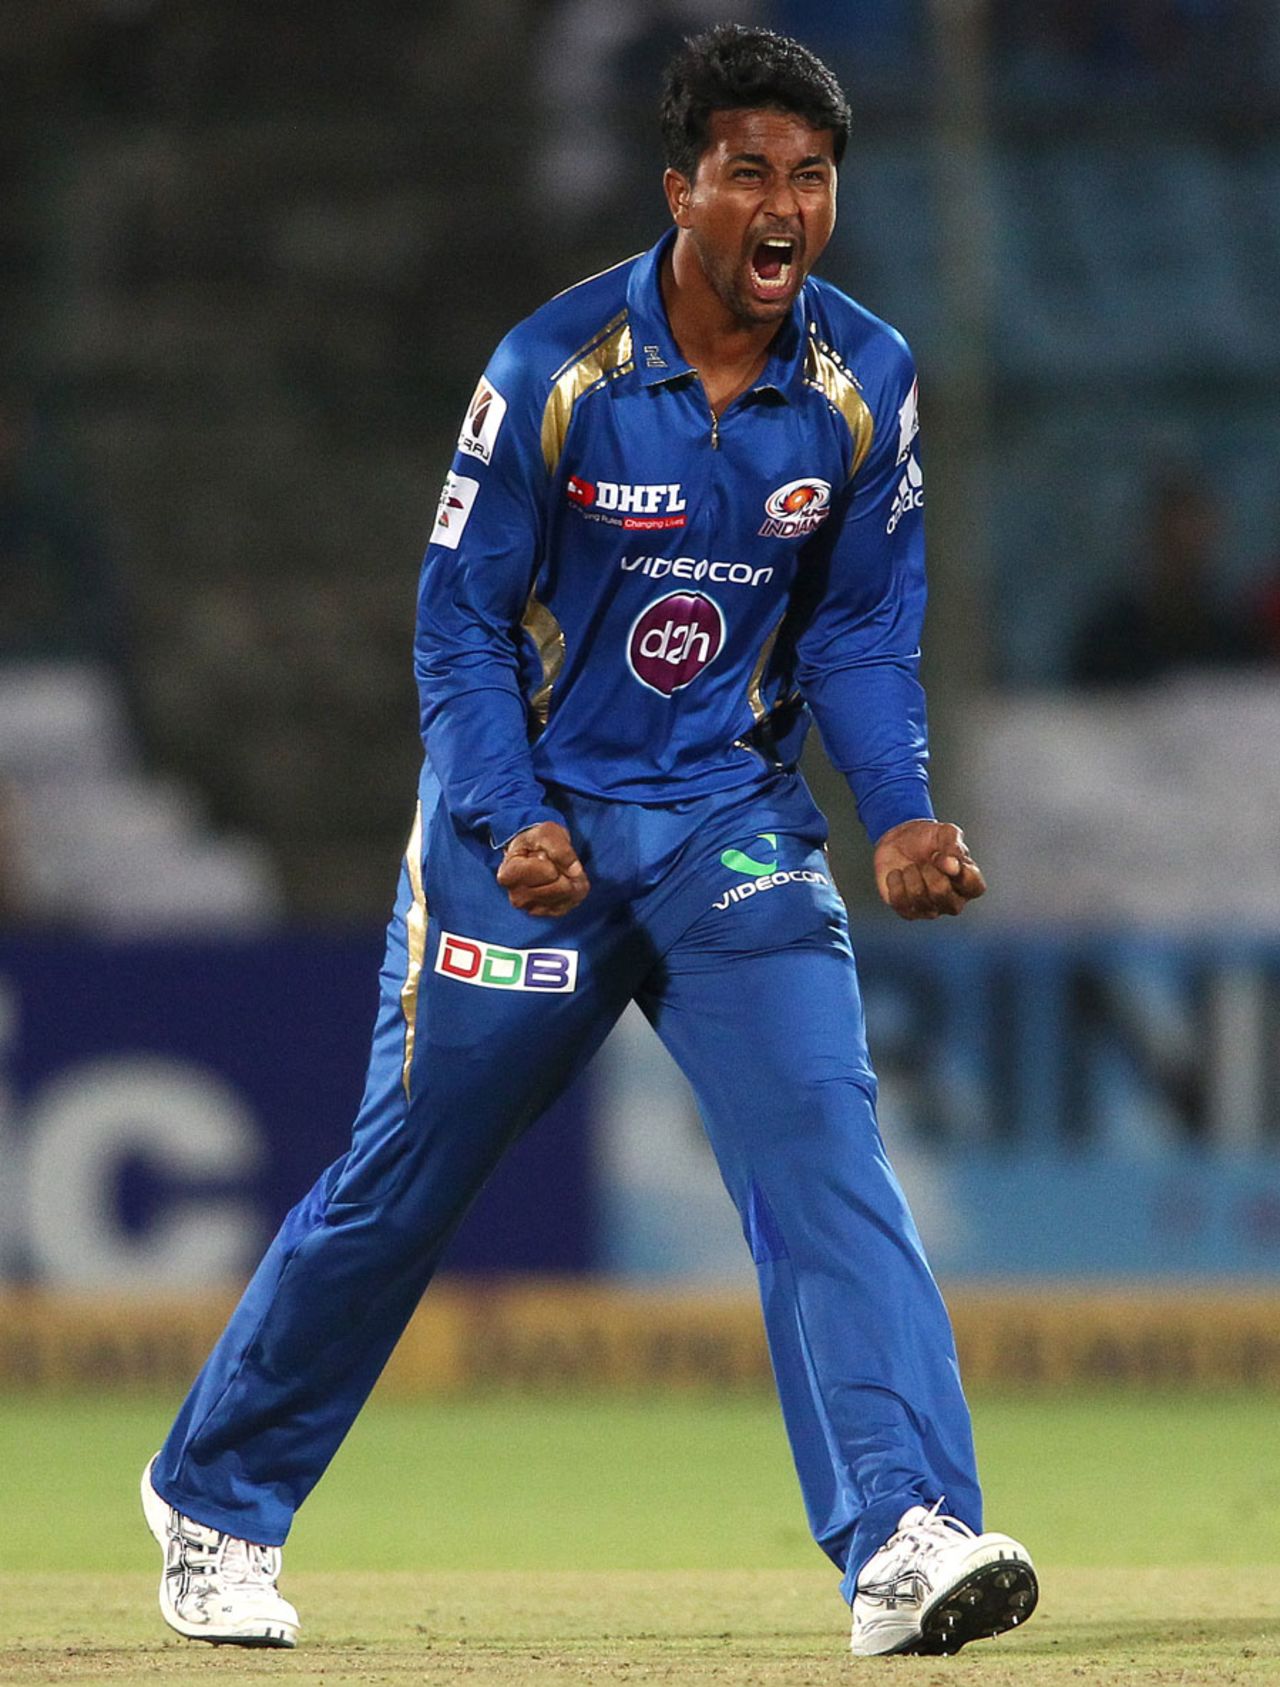 Pragyan Ojha exults after a wicket, Lions v Mumbai Indians, Group A, Champions League 2013, Jaipur, Sep 27, 2013